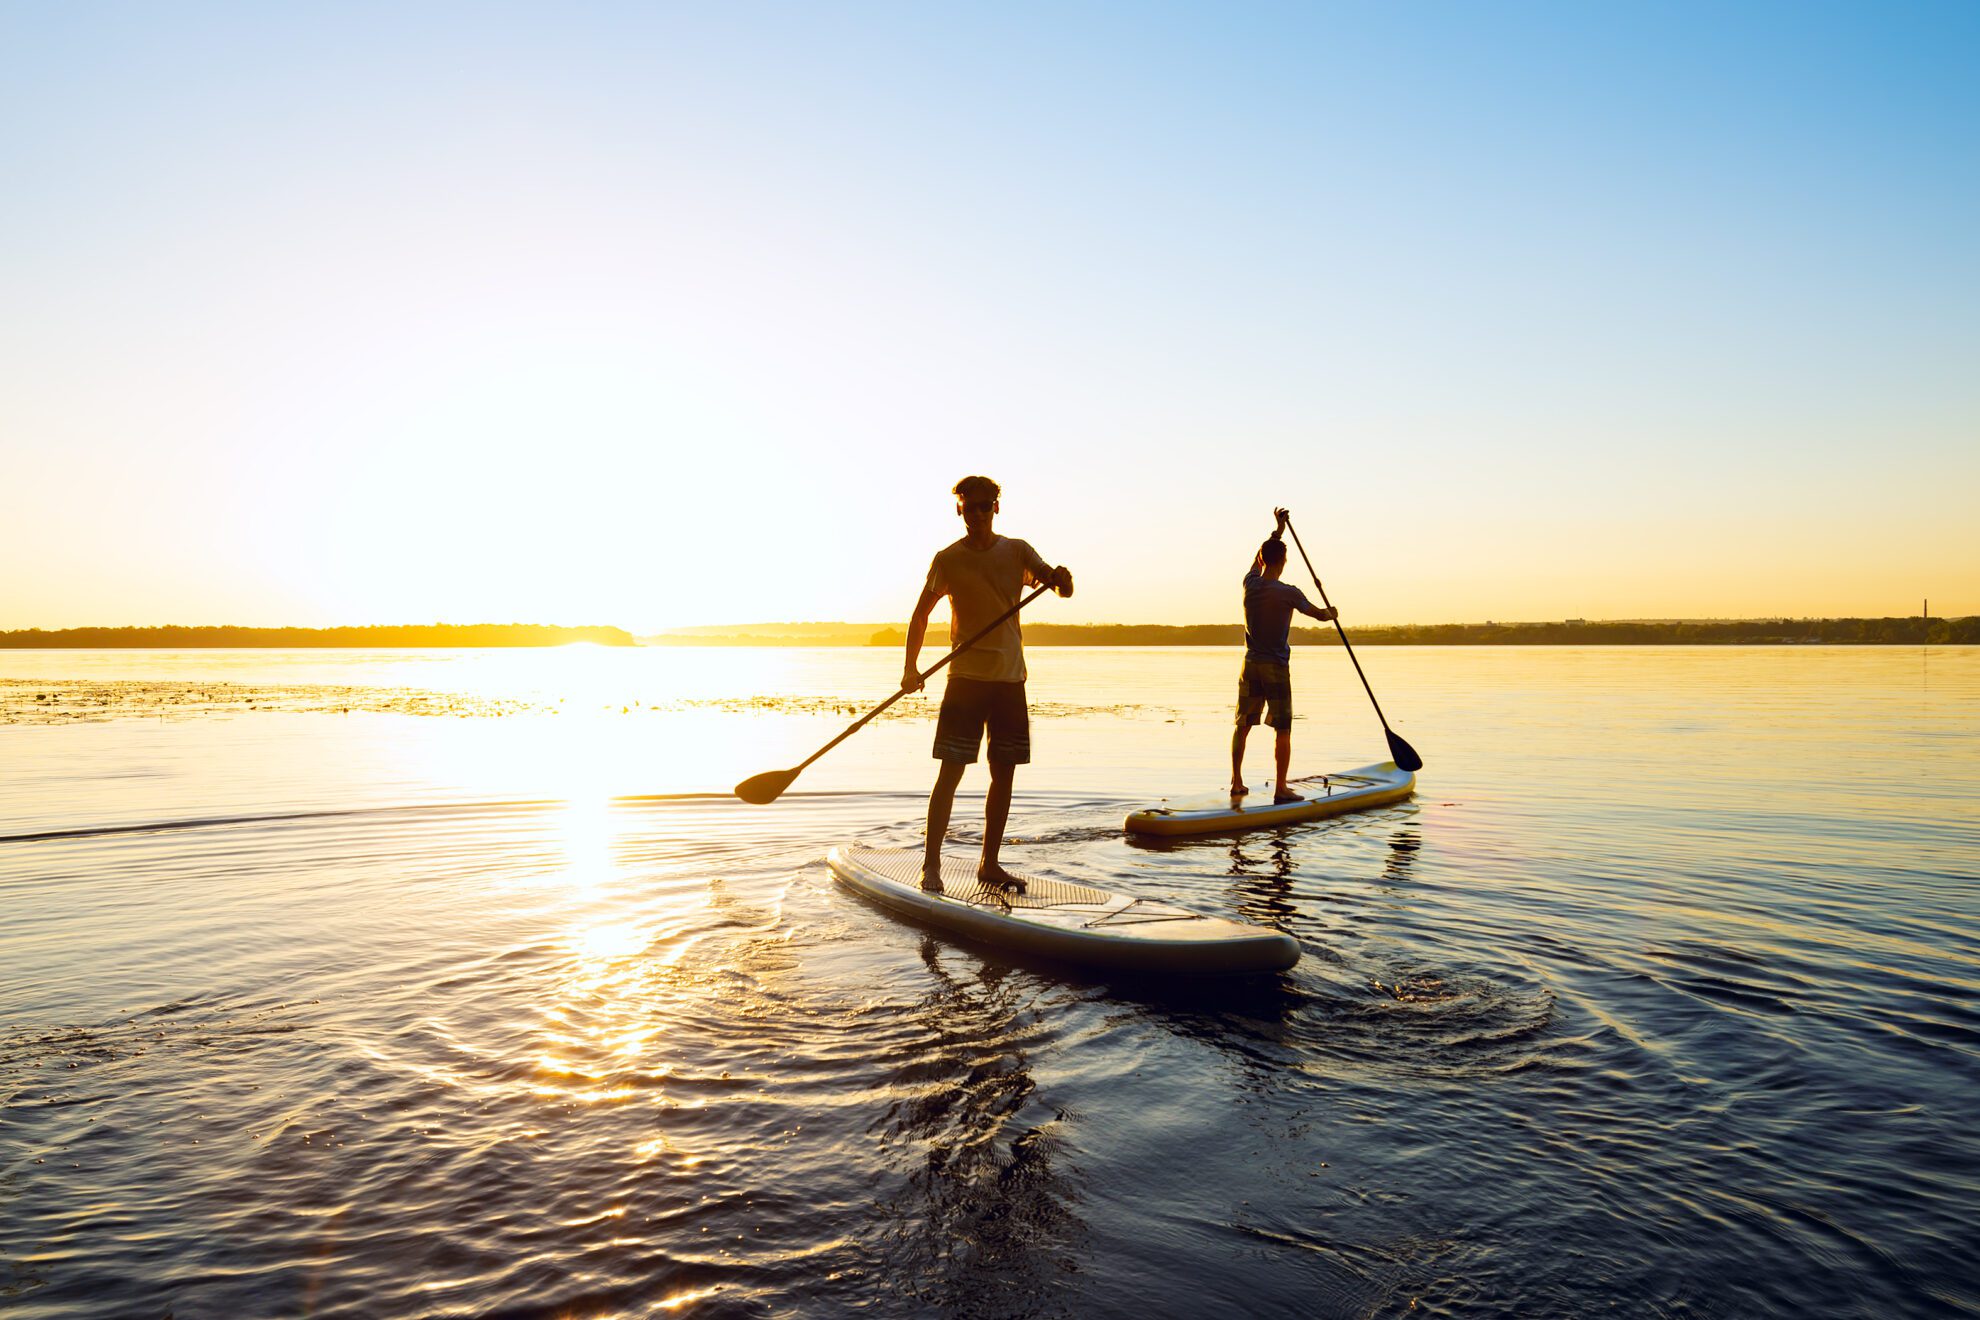 Quins beneficis ens pot aportar el Stand Up Paddle (SUP) o Paddle Surf?